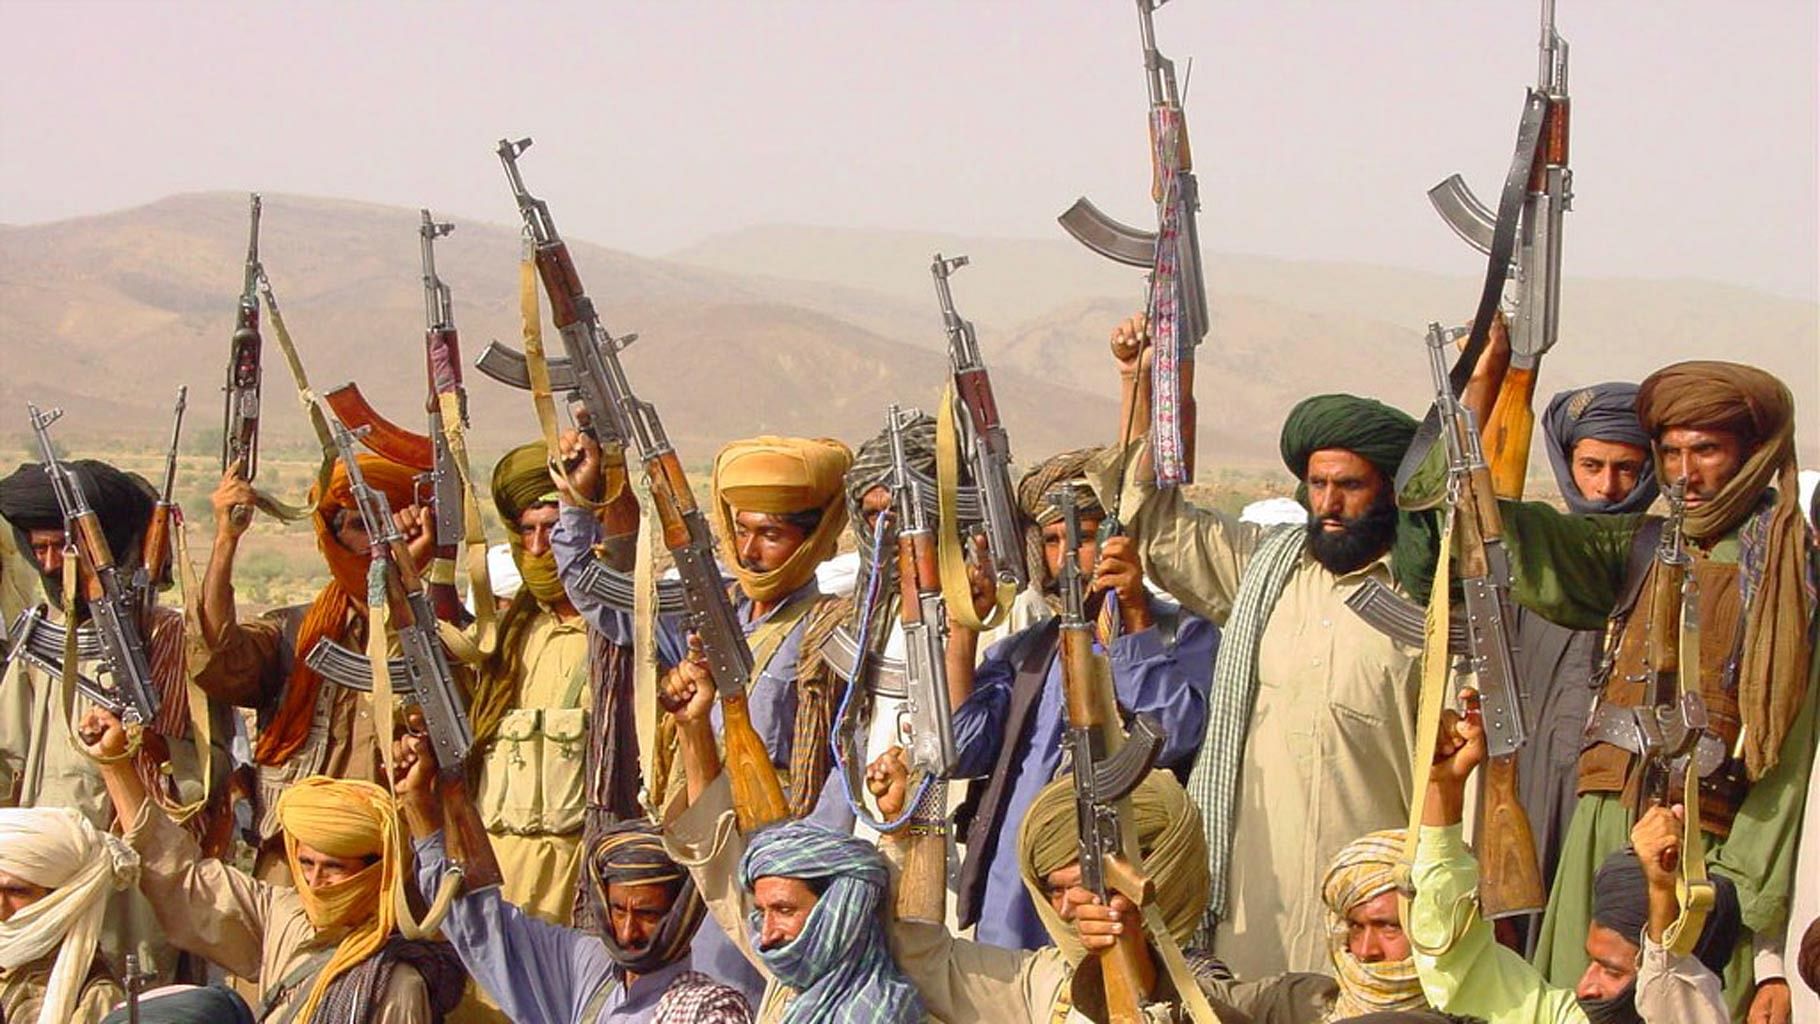 Marri Baloch tribemen up in arms against Pakistani army men. (Photo: Reuters)